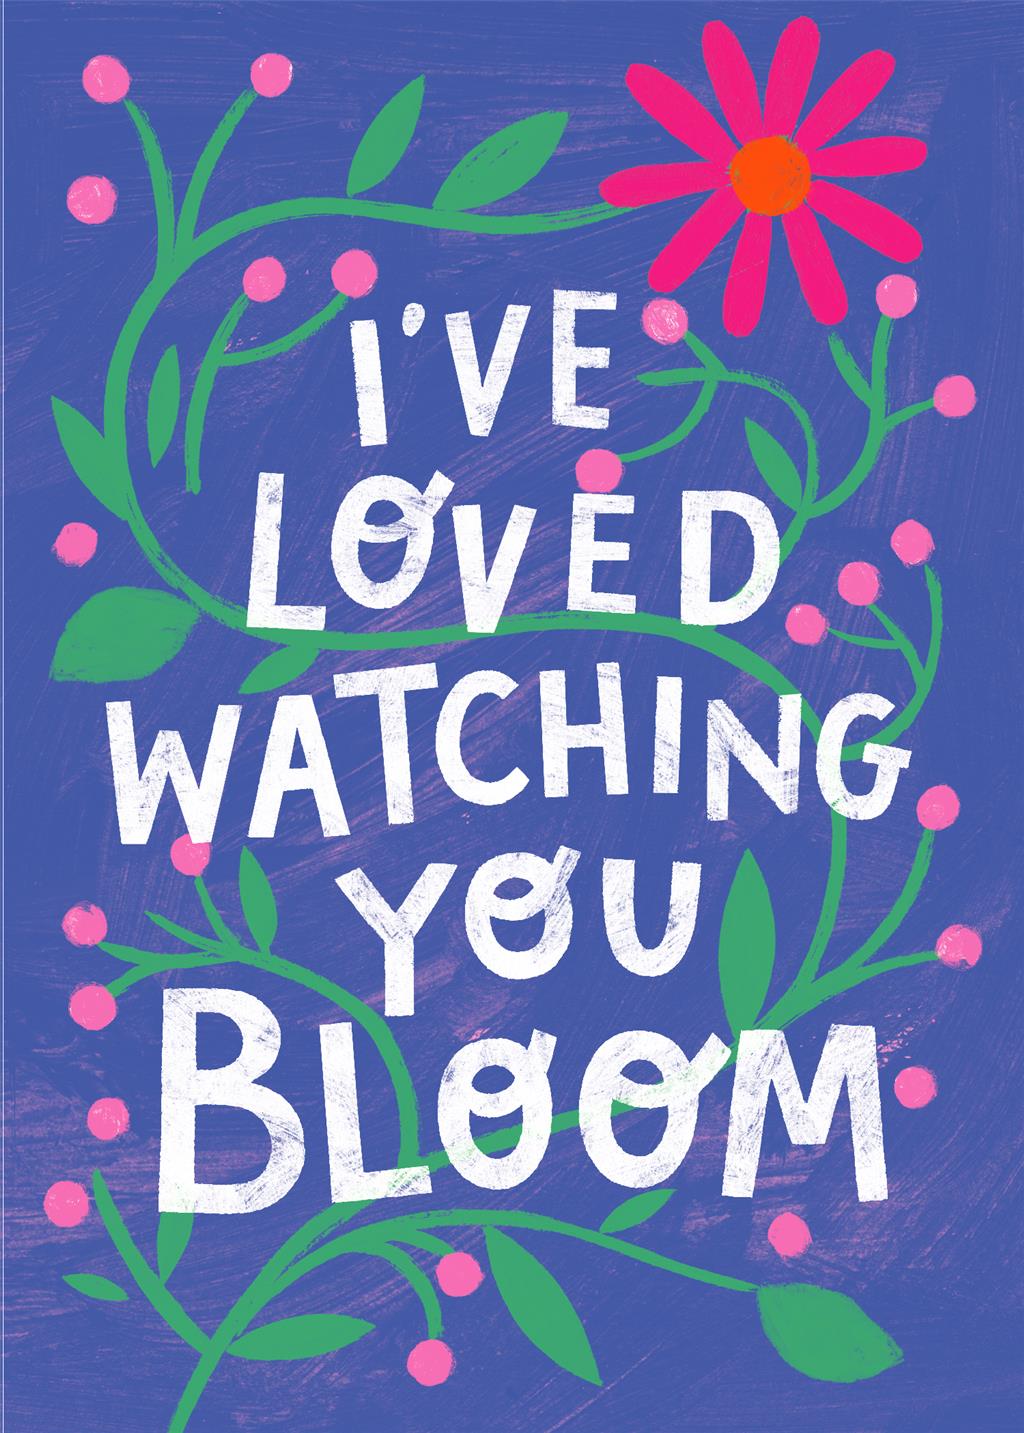 I've loved watched you Bloom